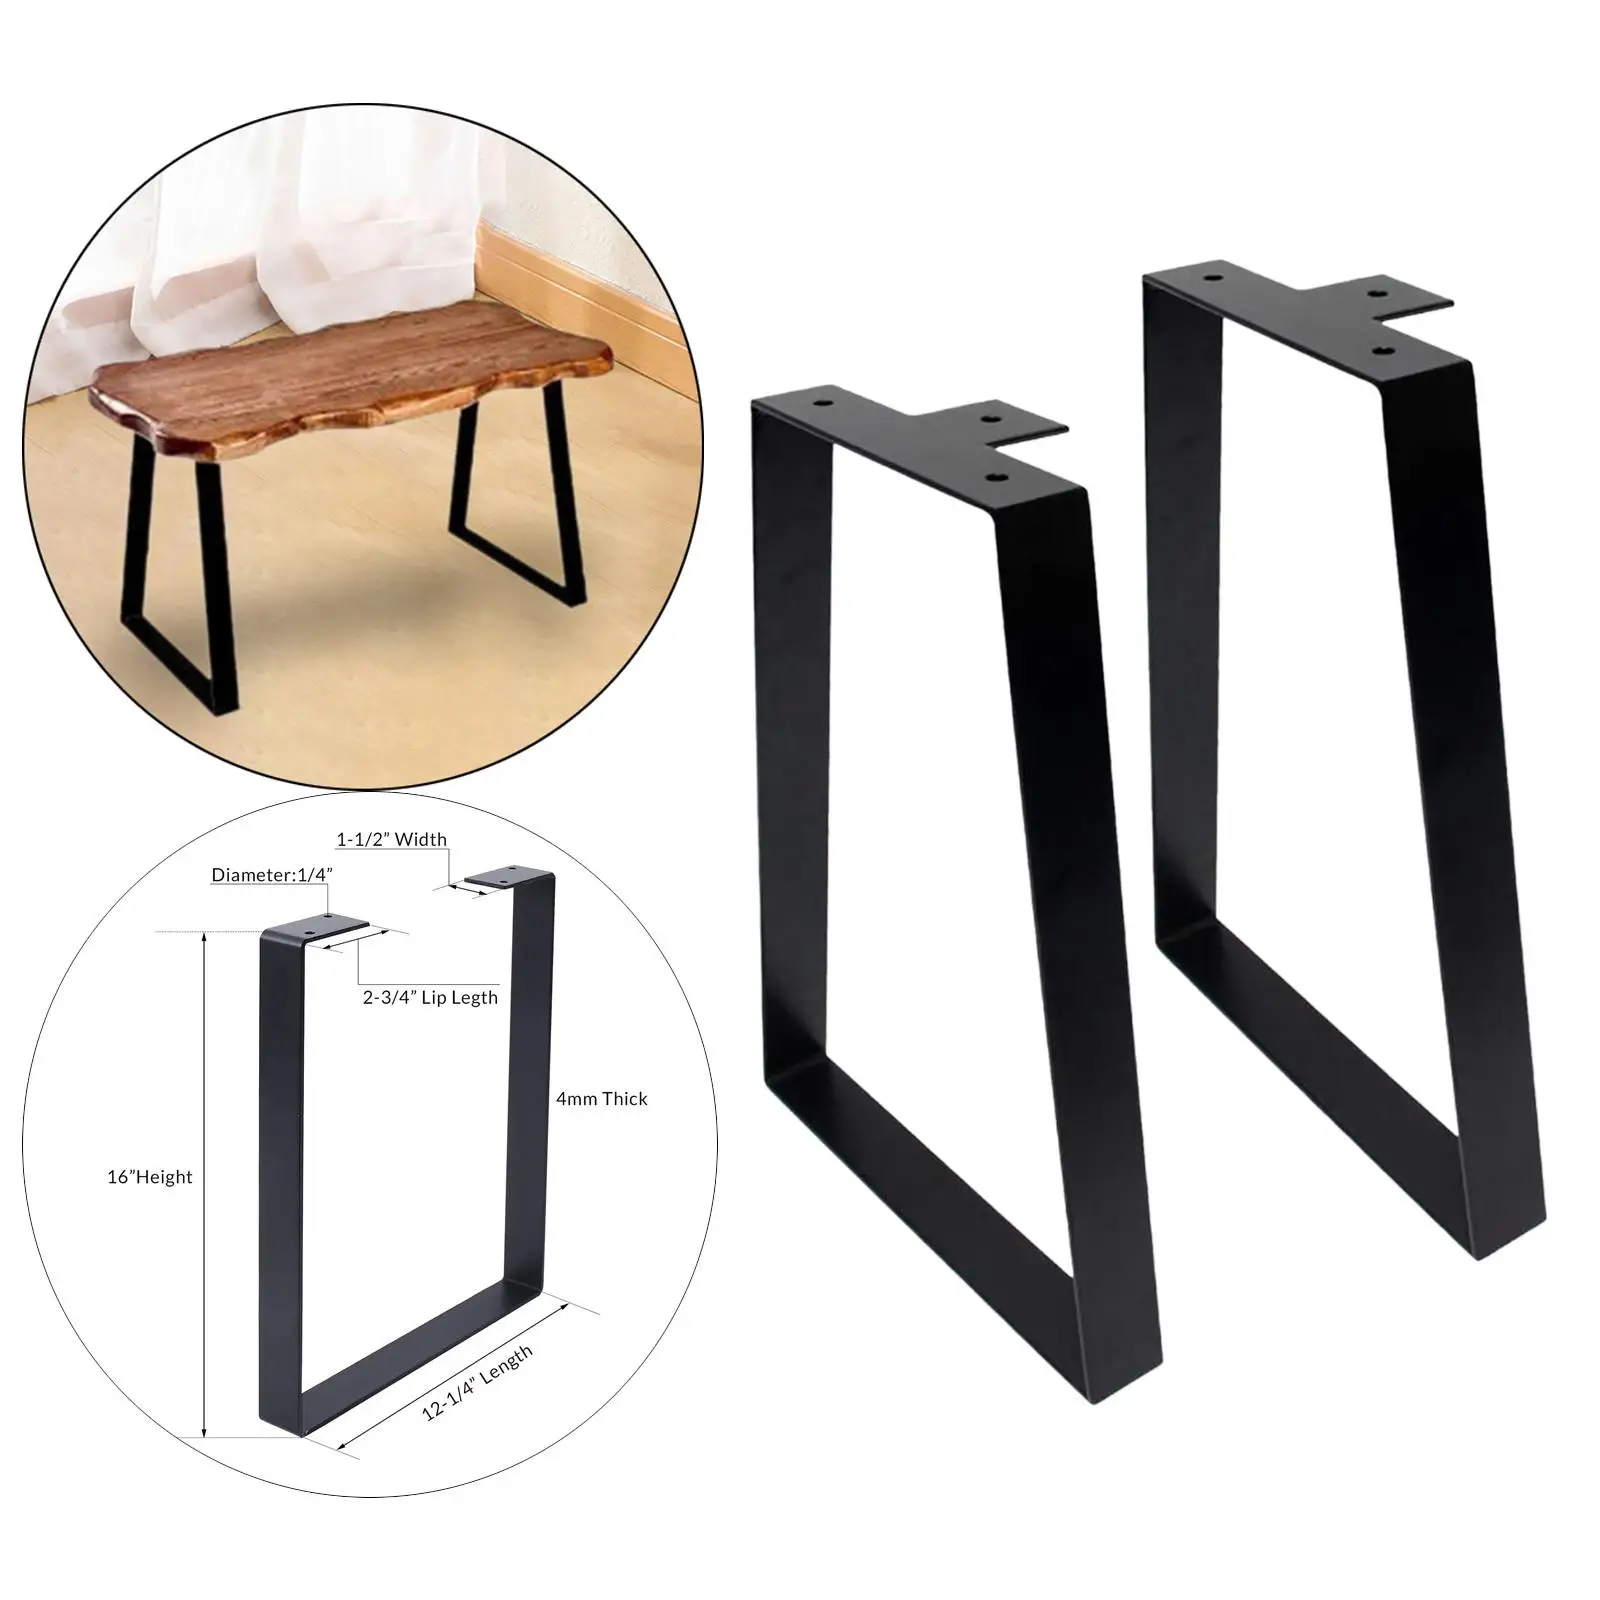 2Pcs Metal Table Legs Furniture Legs Desk Legs Heavy Duty Industrial Bench Legs for Dining Table Night Stands Accessories